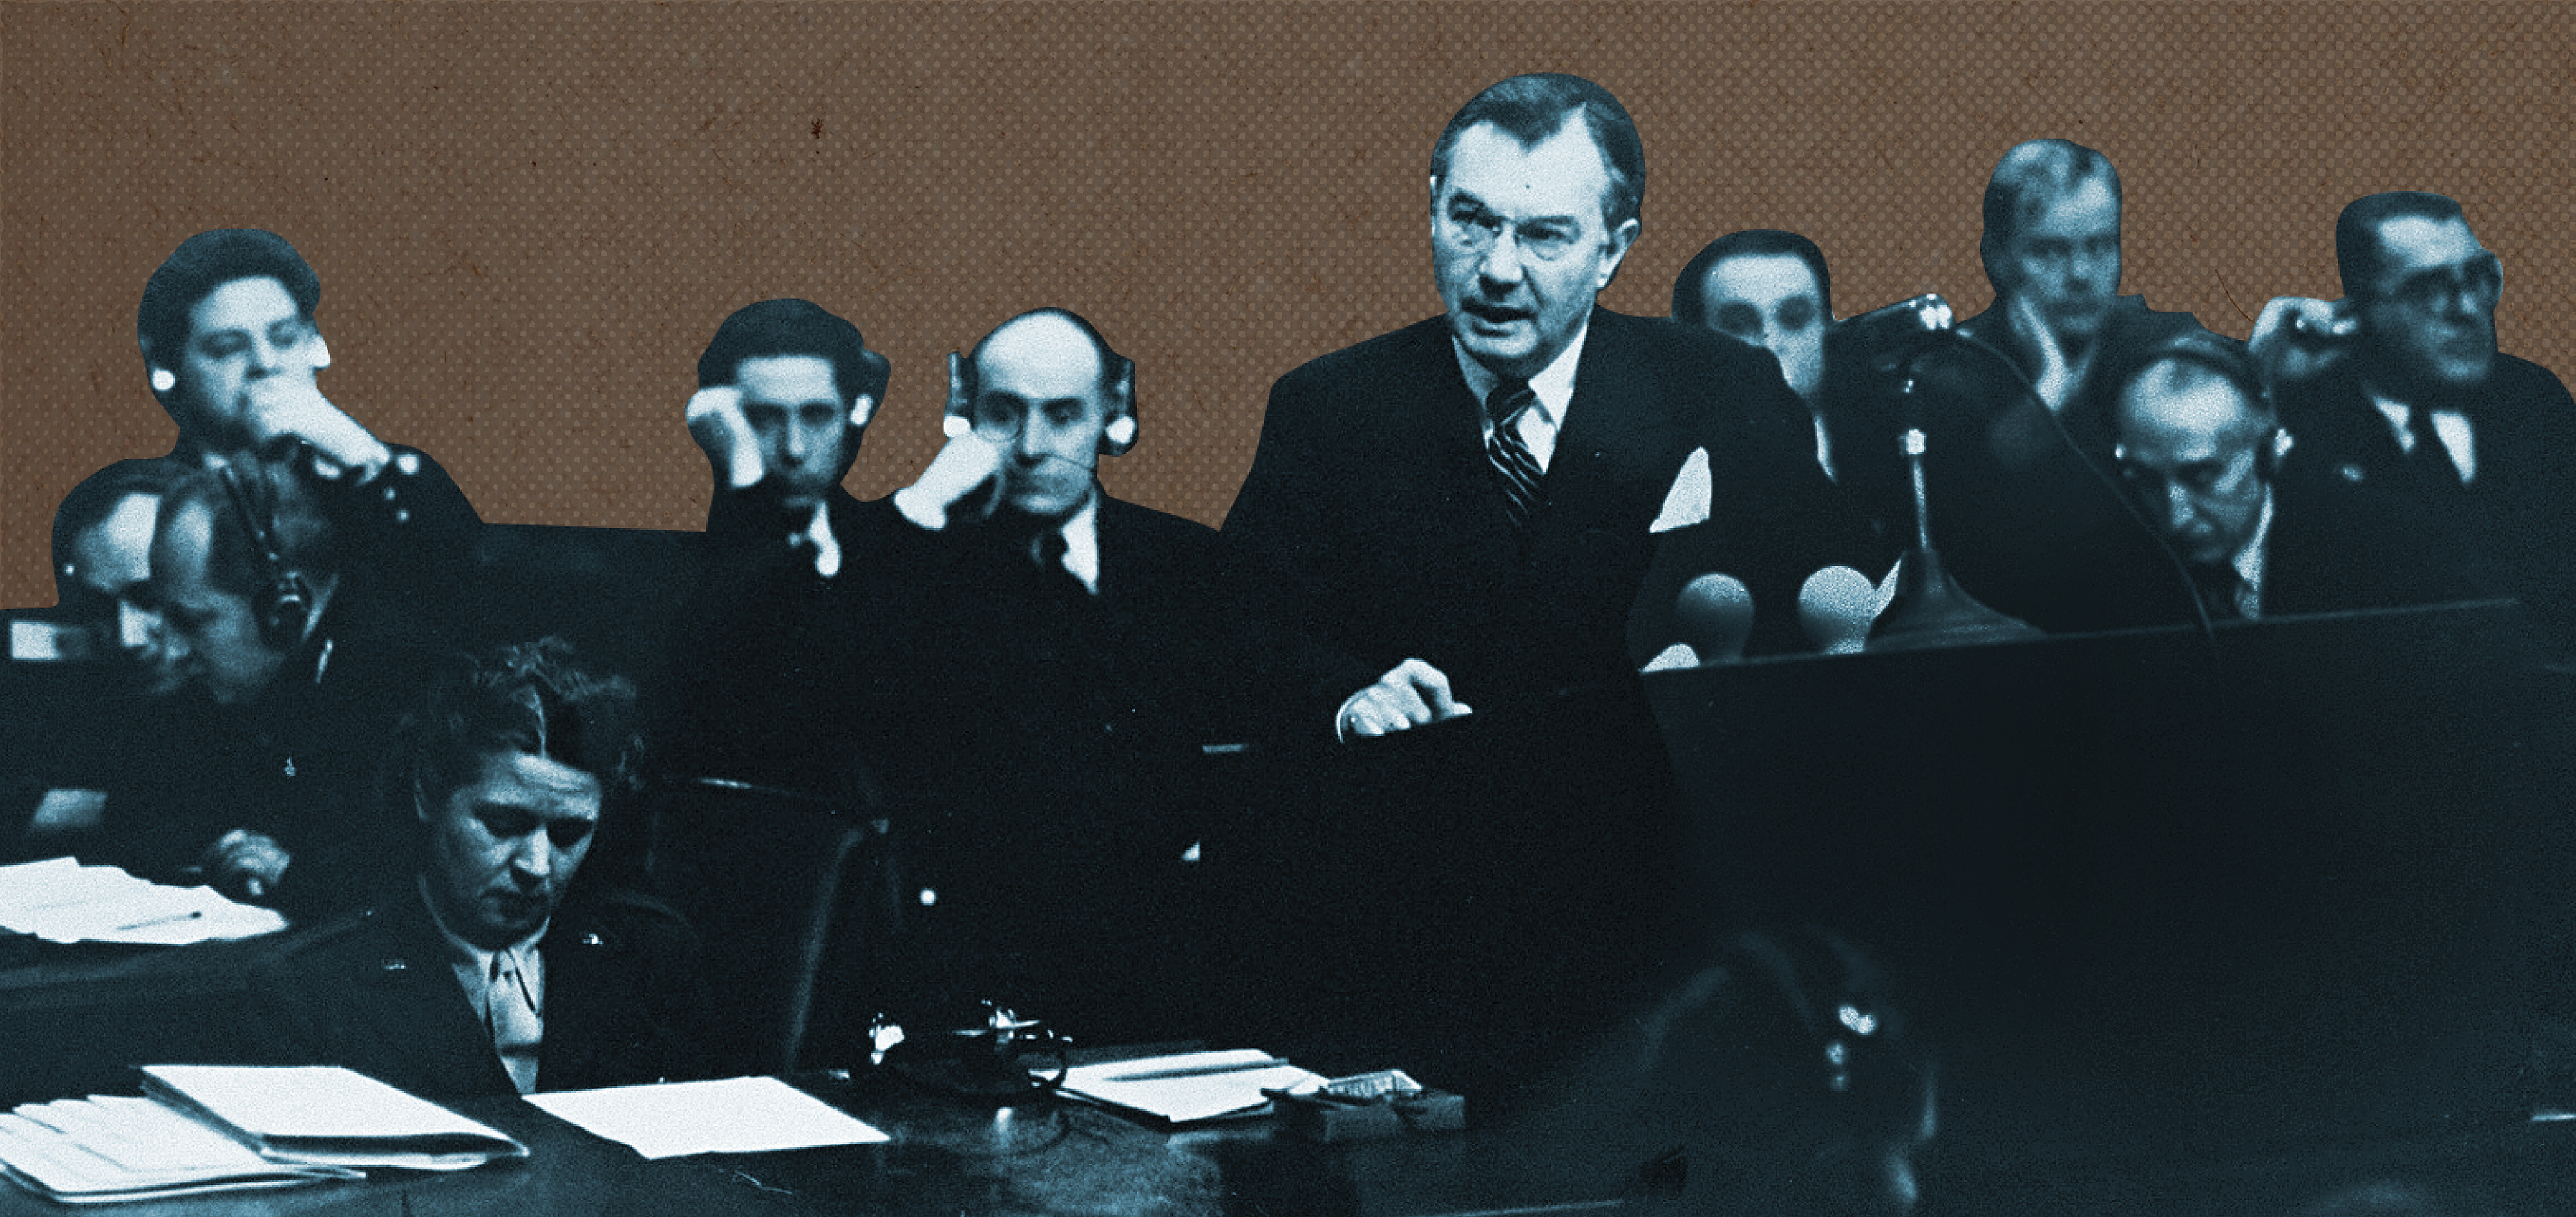 The International Military Tribunal of the victorious Allies presided over war crimes trials in Nuremberg